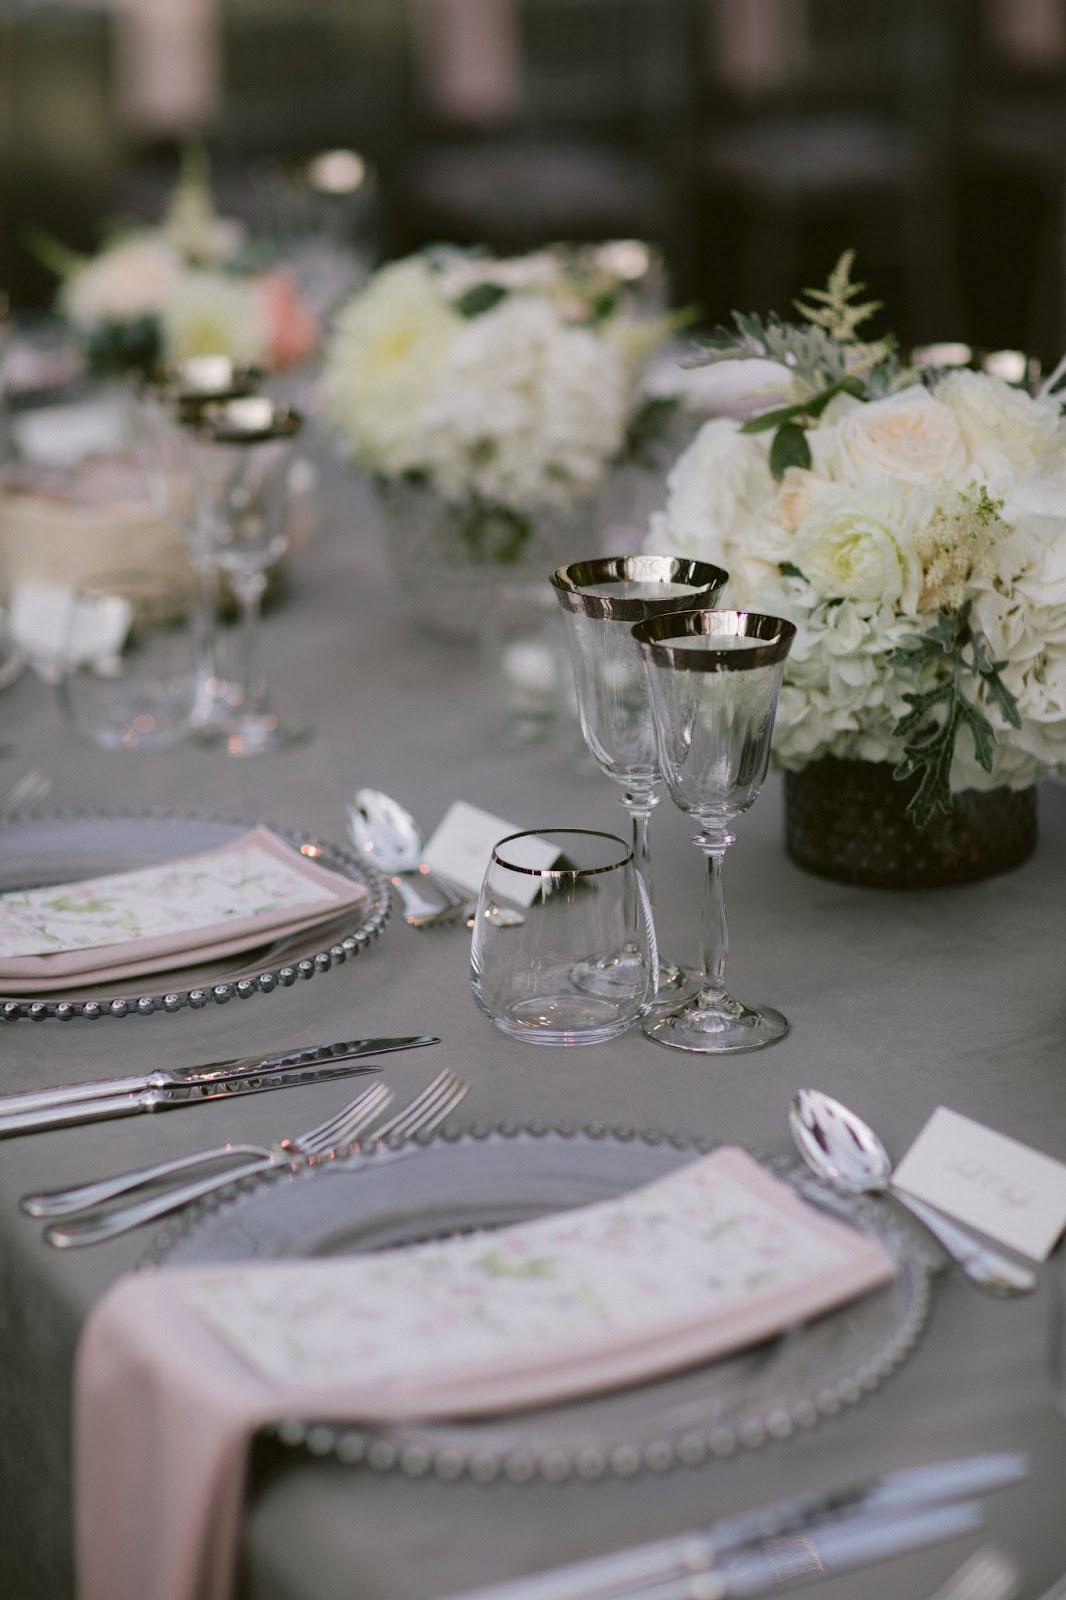 Table set up with silverware and white florals by Tara Fay.